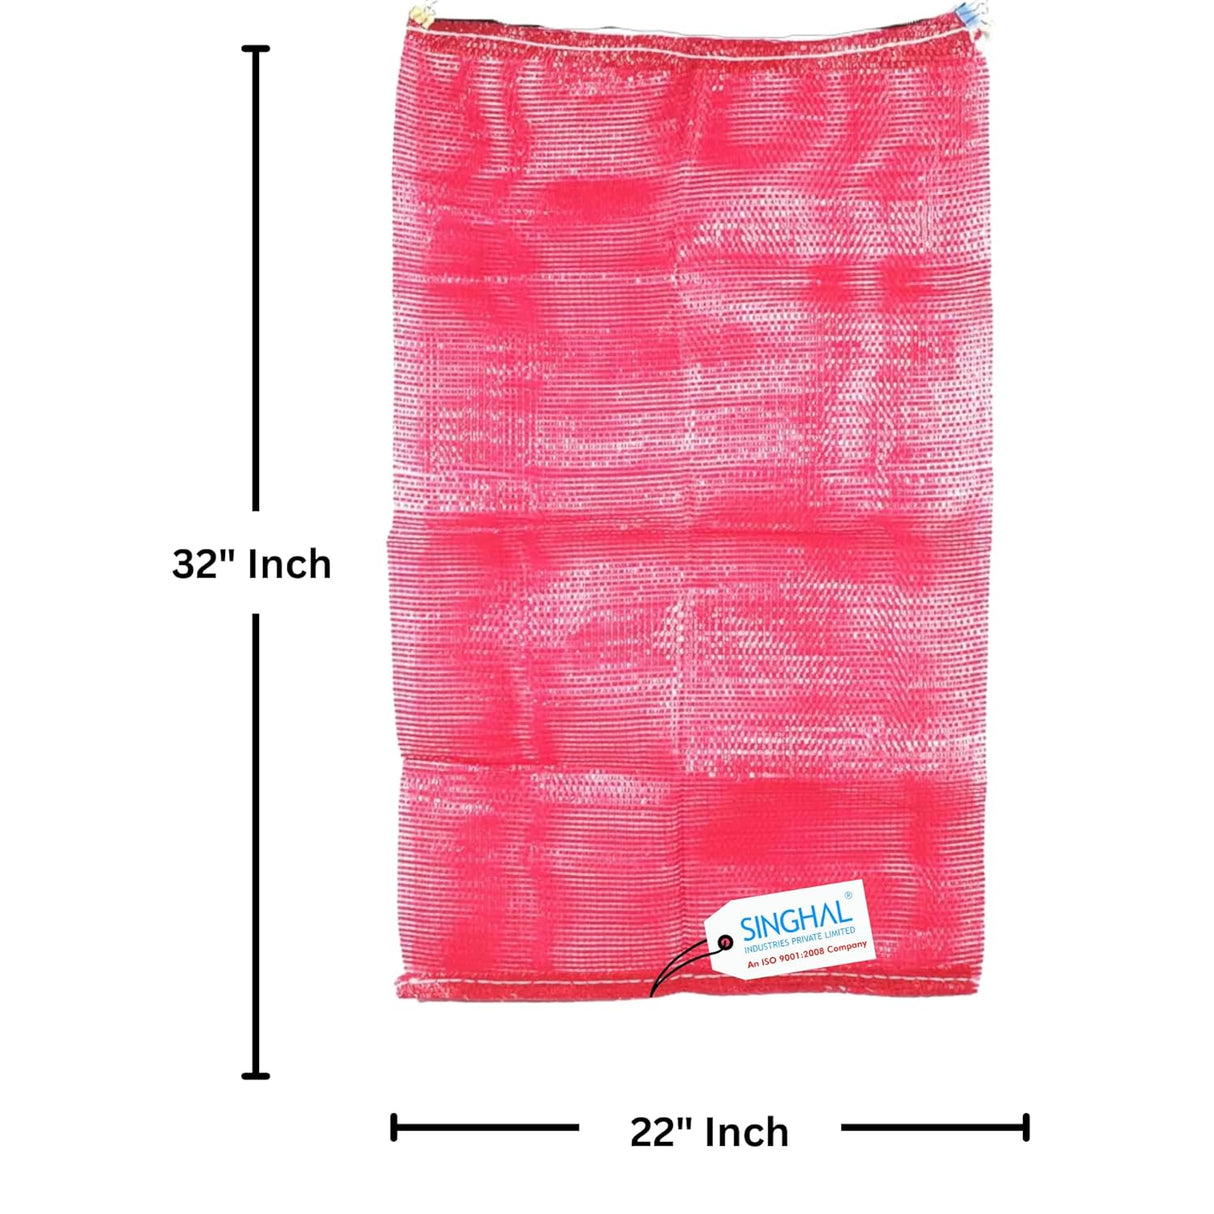 Singhal PP Mesh Storage Bags 22x32 Inch with Drawstring, Magenta (Rani Pink) Color | upto 40kg capacity Great for Packaging Produce, Vegetables and Fruit | Multipurpose Bora, Bori (25)